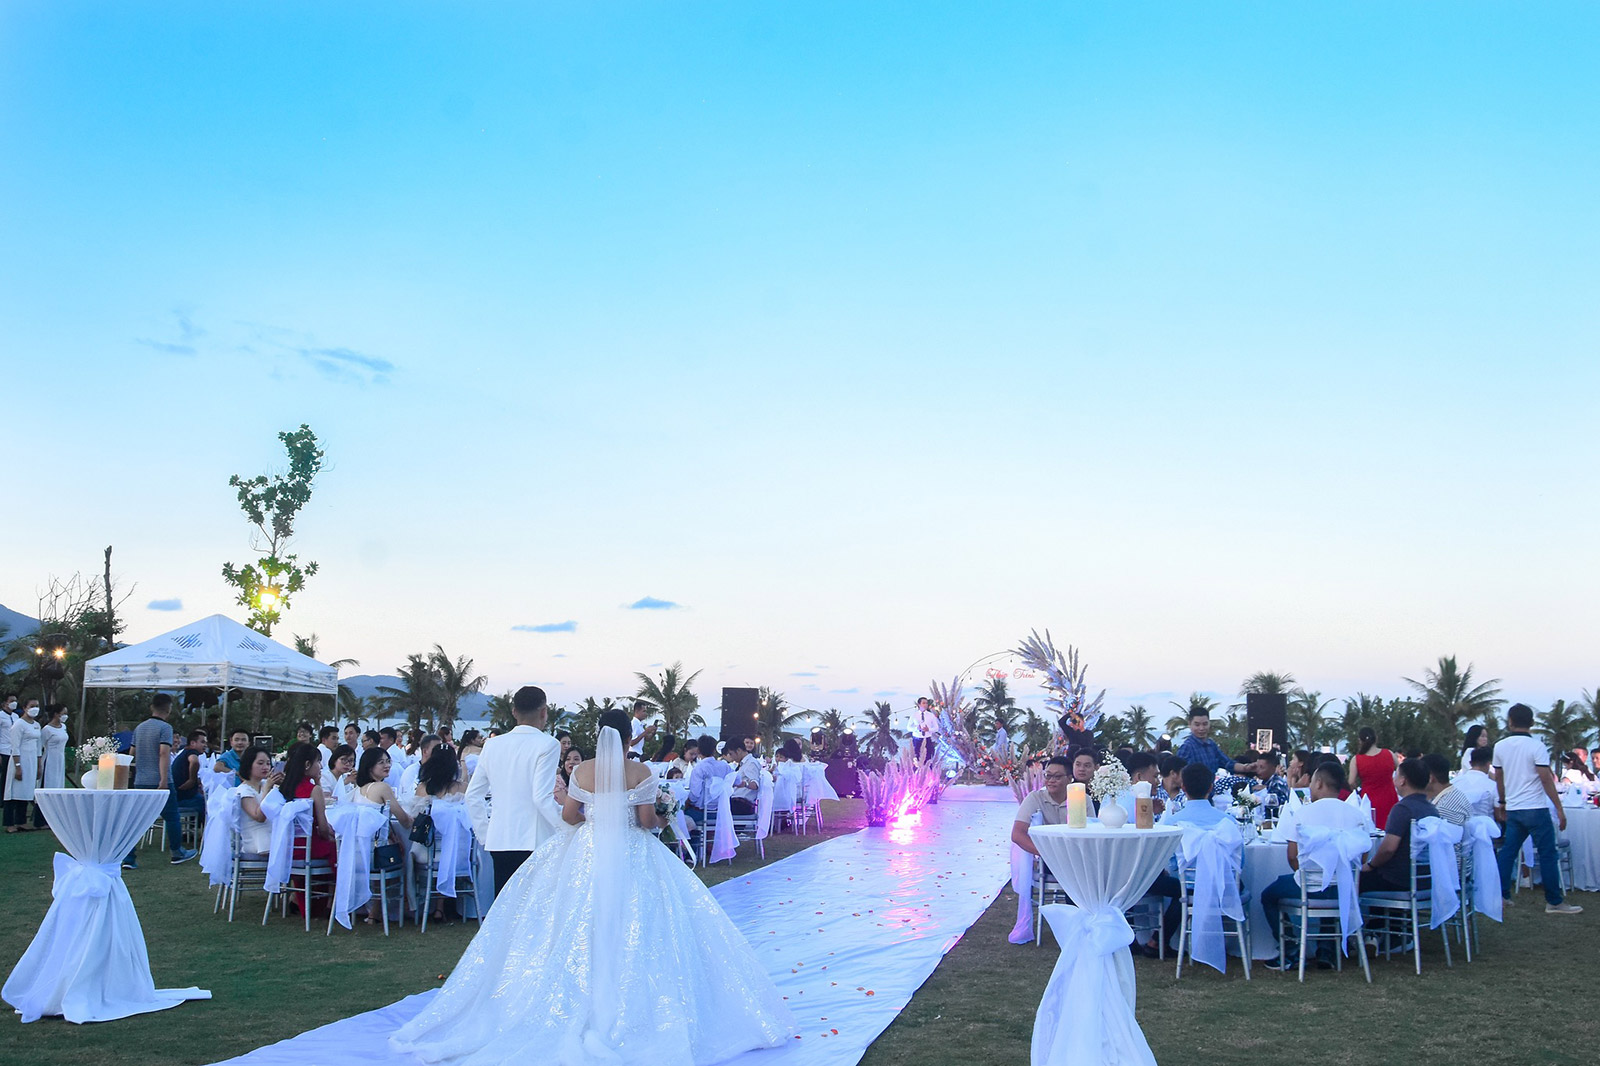 A PICTURESQUE WEDDING CEREMONY QUOC THIEN - TO TRINH AT ARIYANA CONVENTION CENTRE DANANG